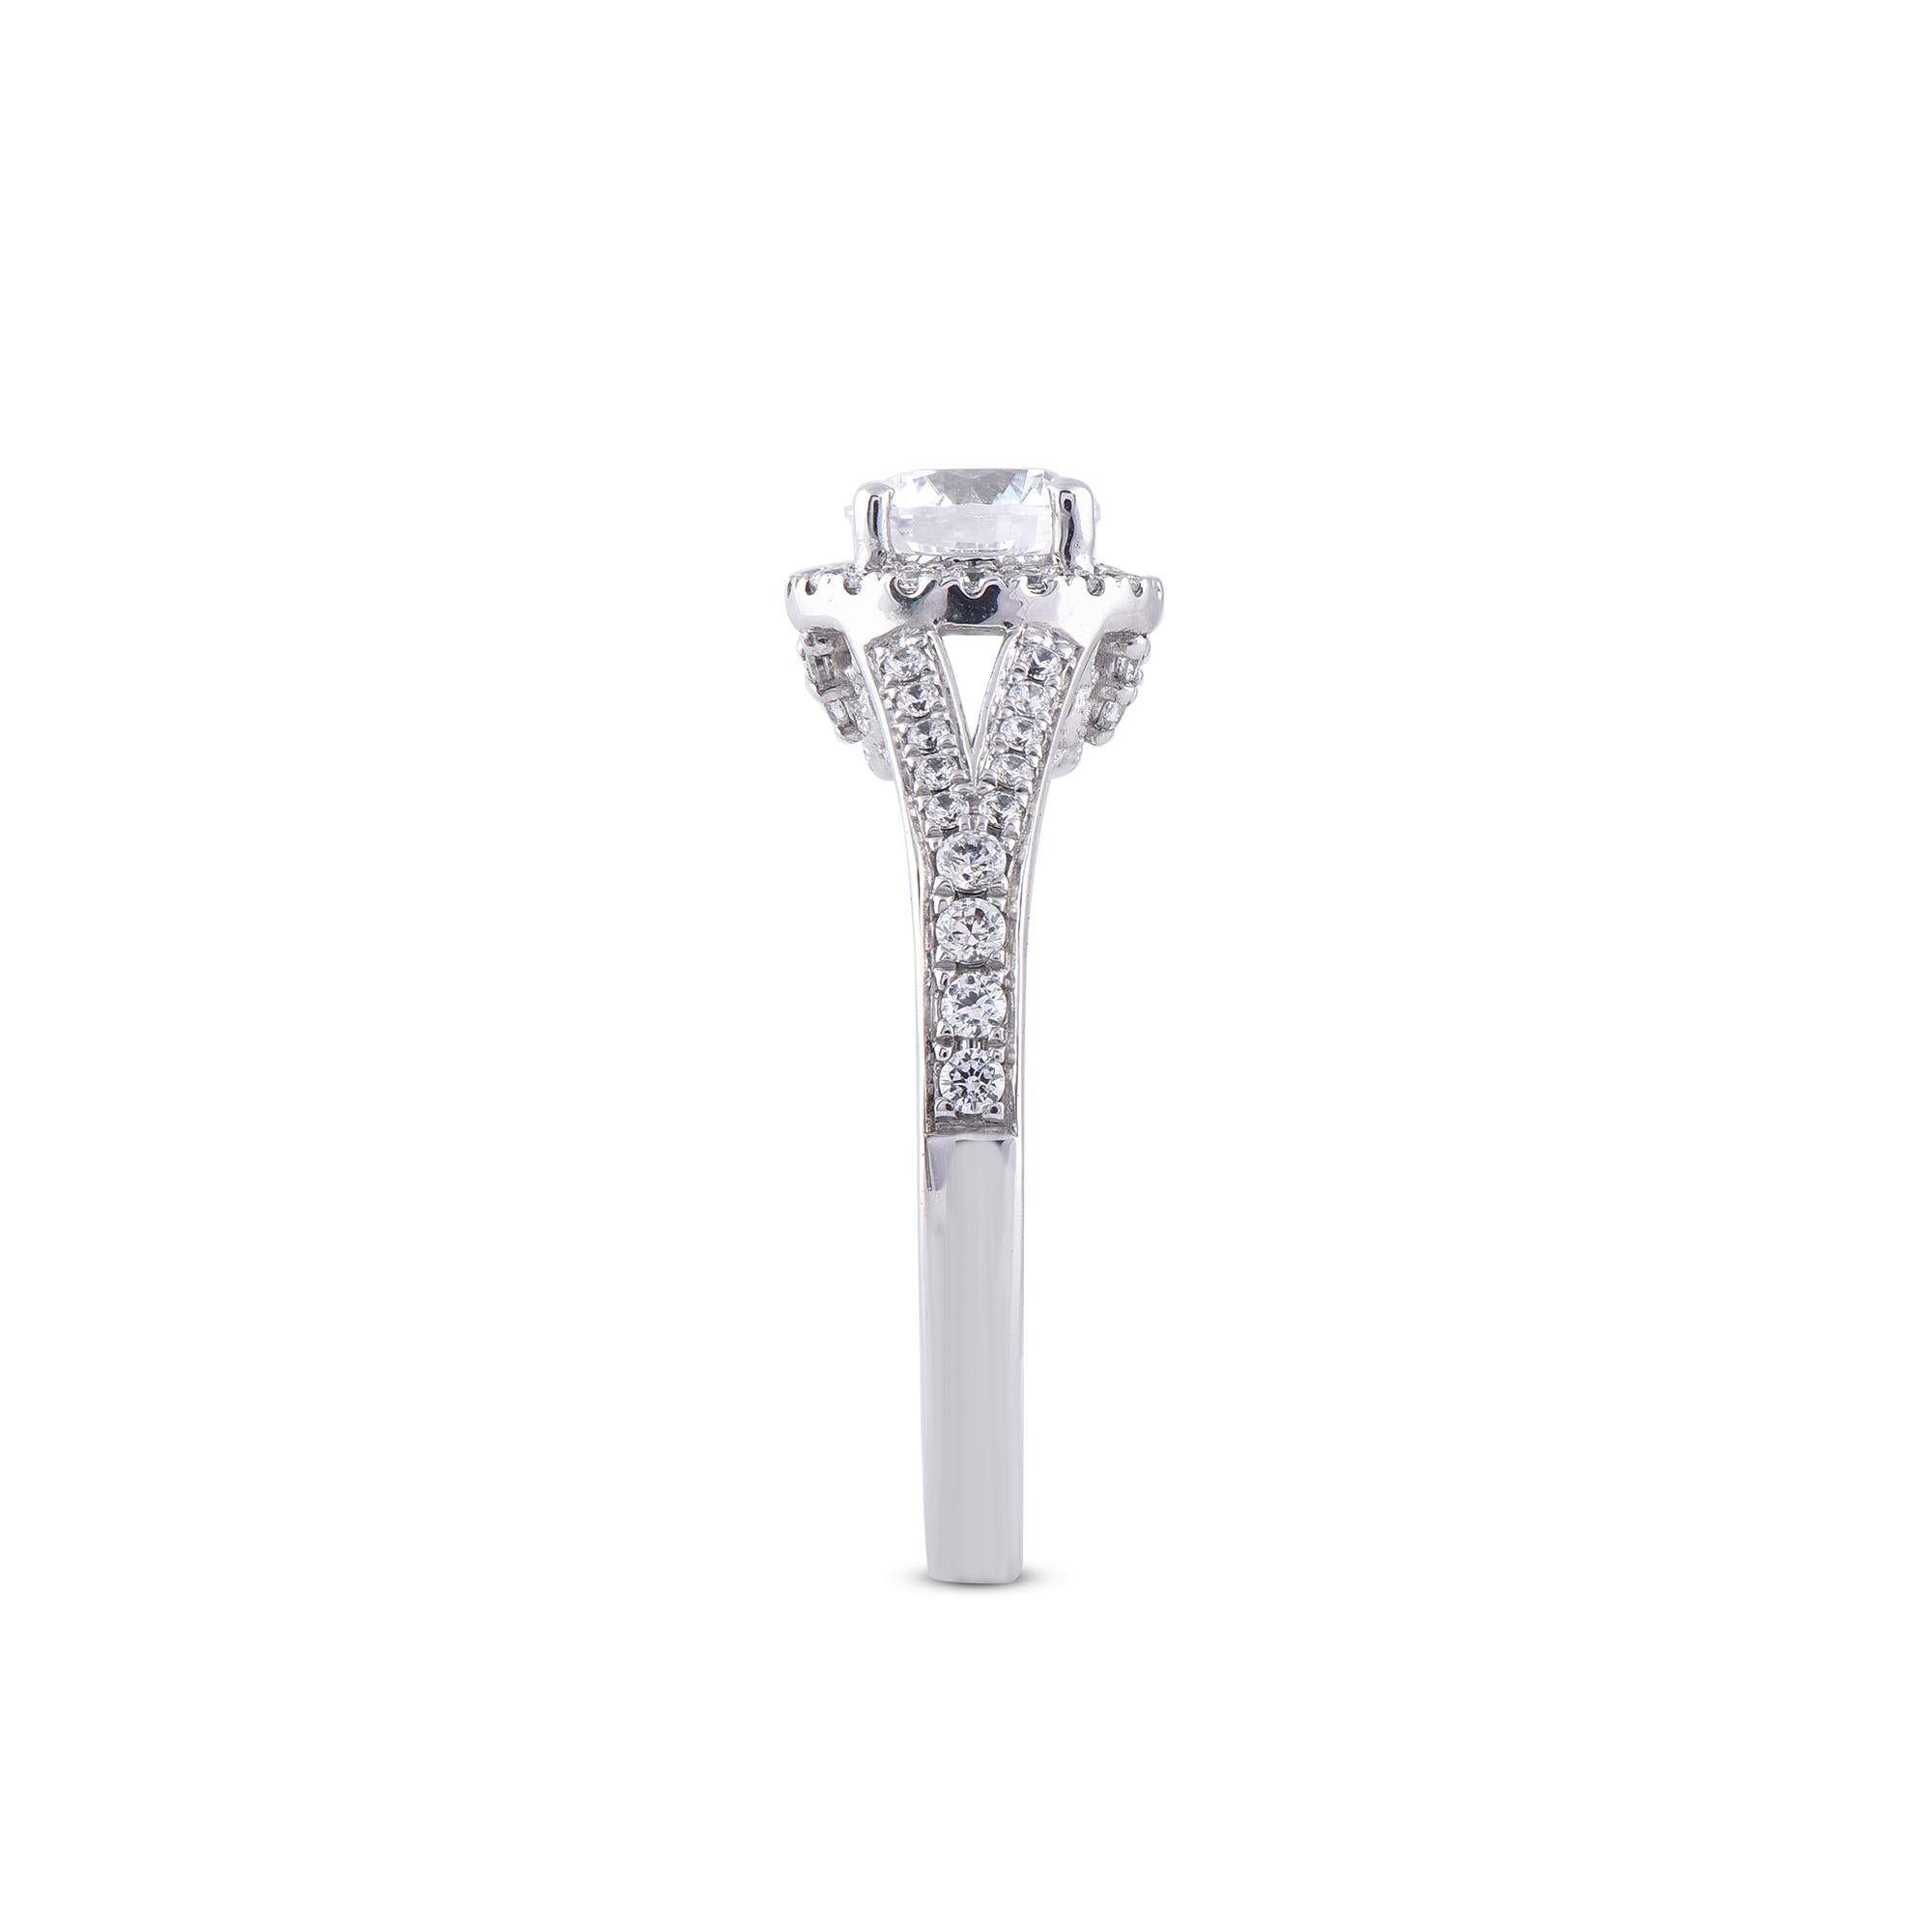 TJD 1.19 Carat Diamond 18 Karat White Gold Halo Designer Shank Engagement Ring In New Condition For Sale In New York, NY